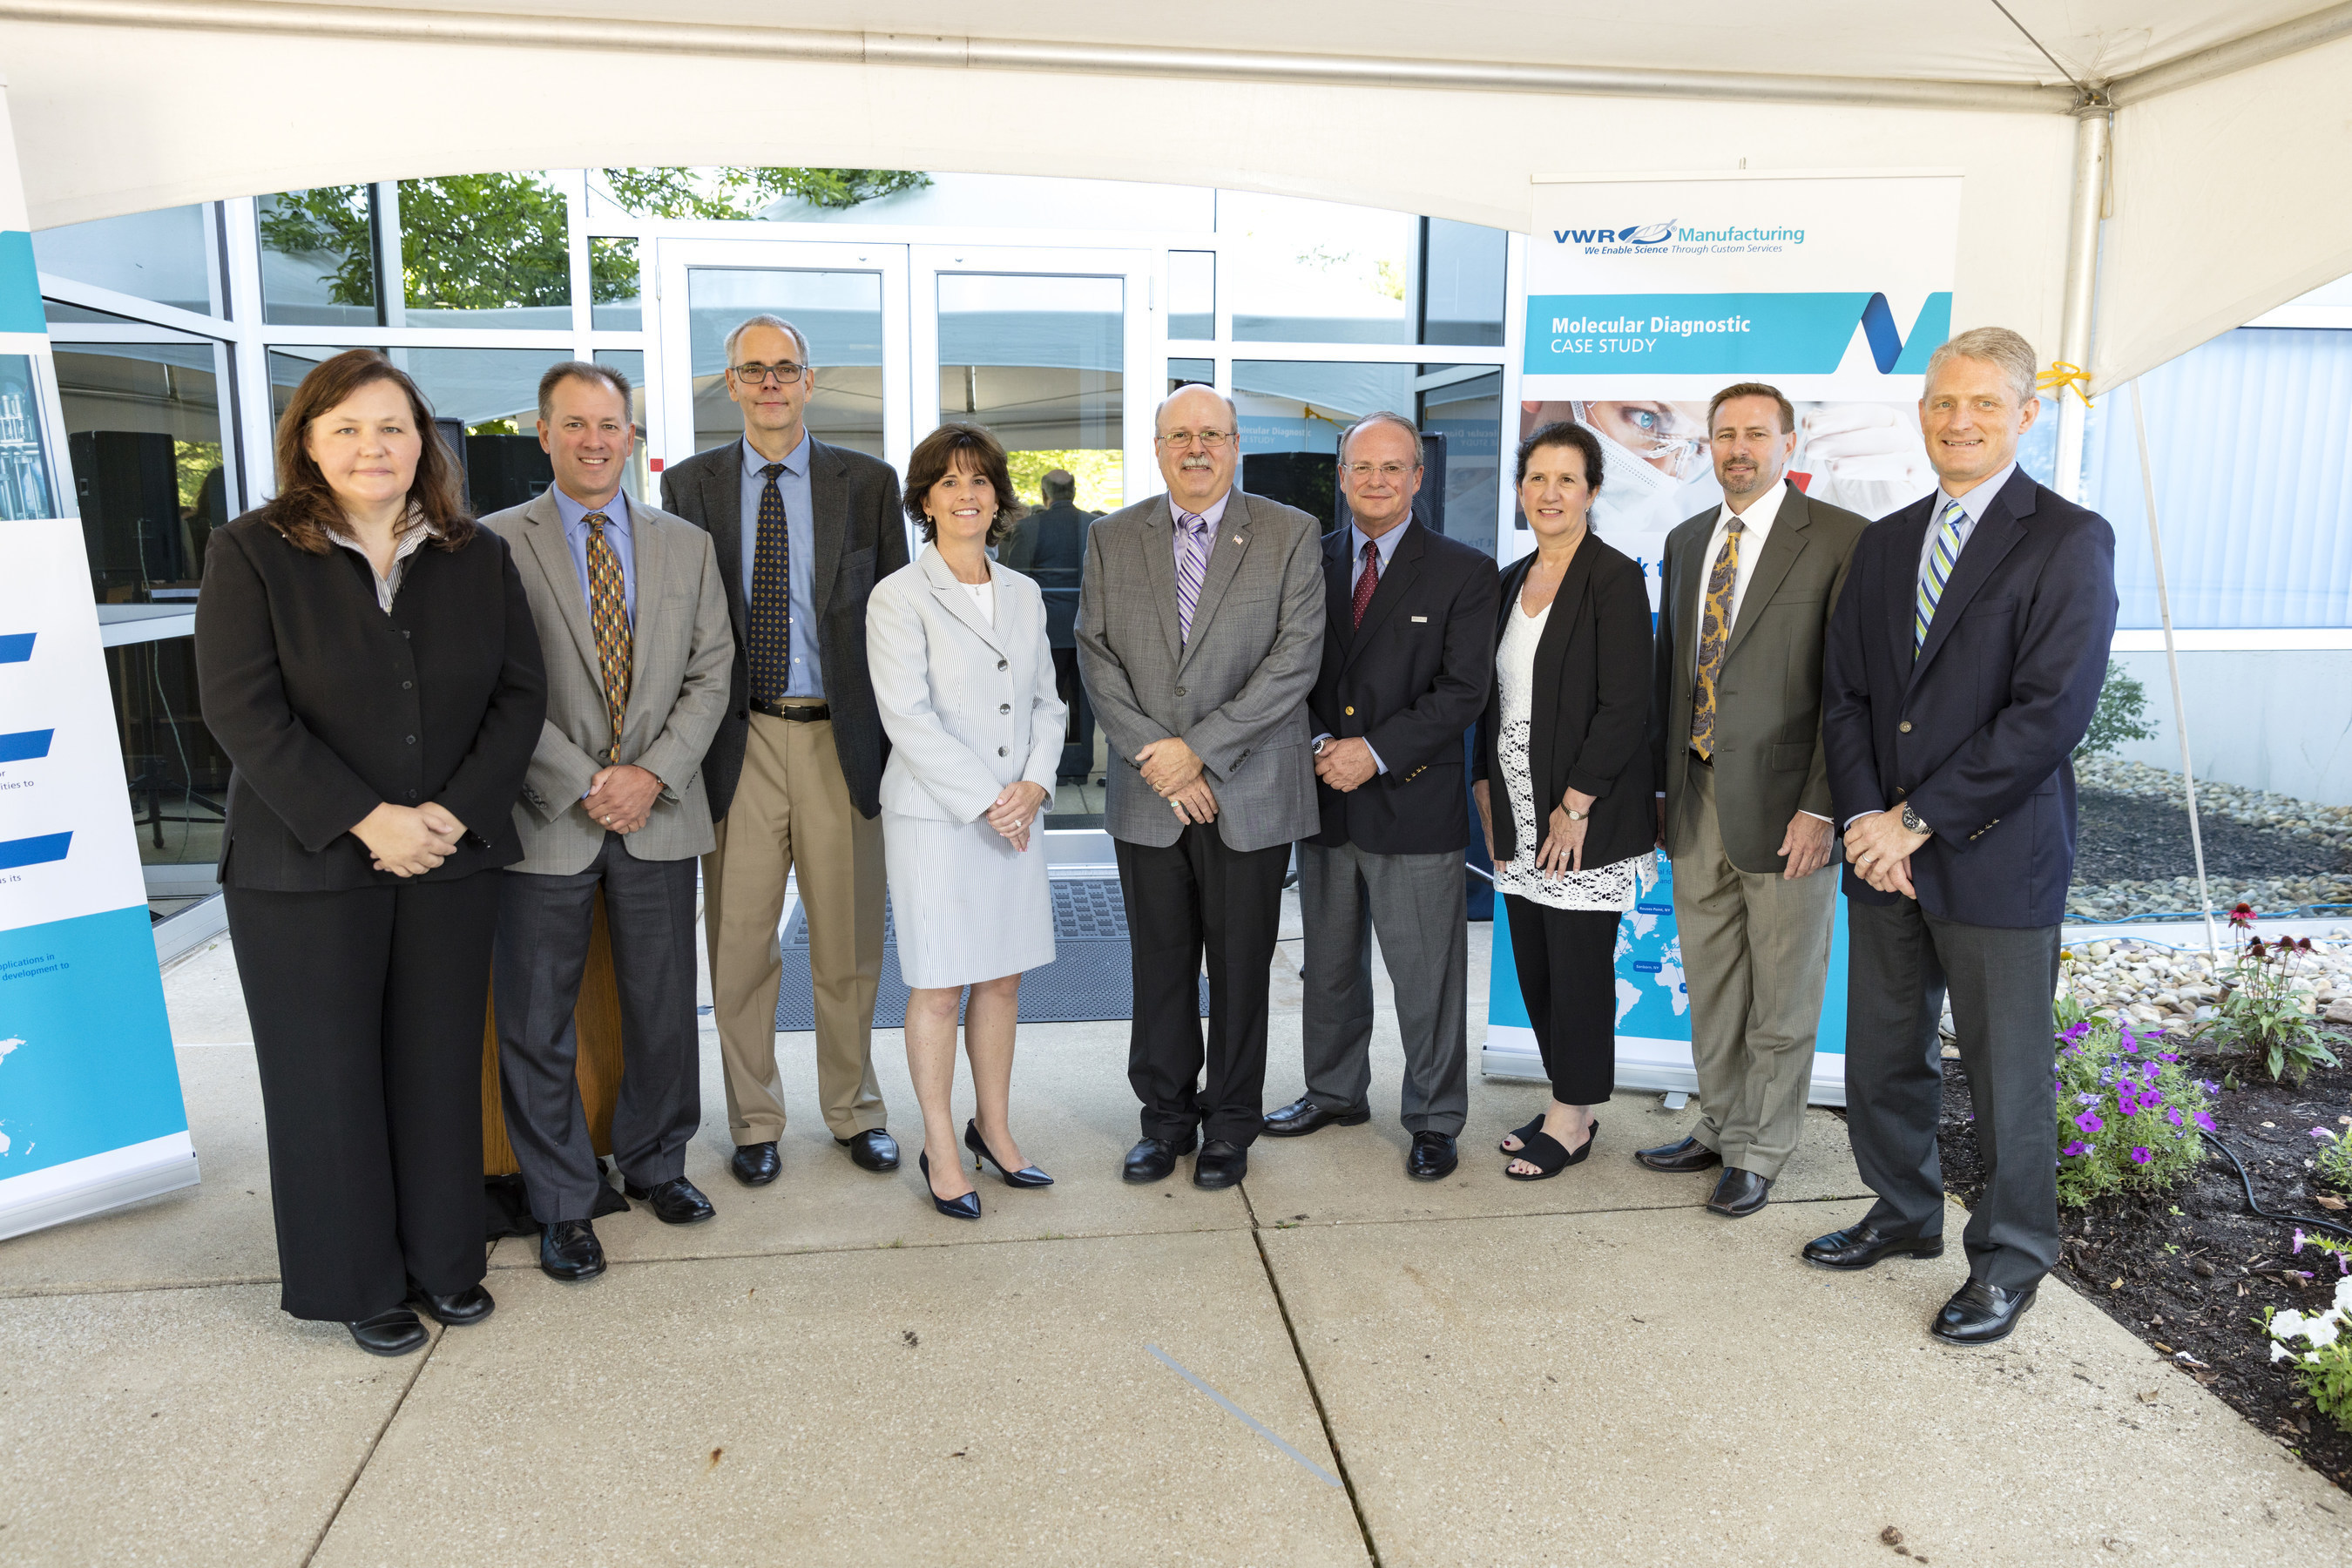 VWR leadership with Susan Drucker, Mayor of Solon (fourth from the left), celebrate the opening of VWR's chemical manufacturing site in Solon, Ohio.